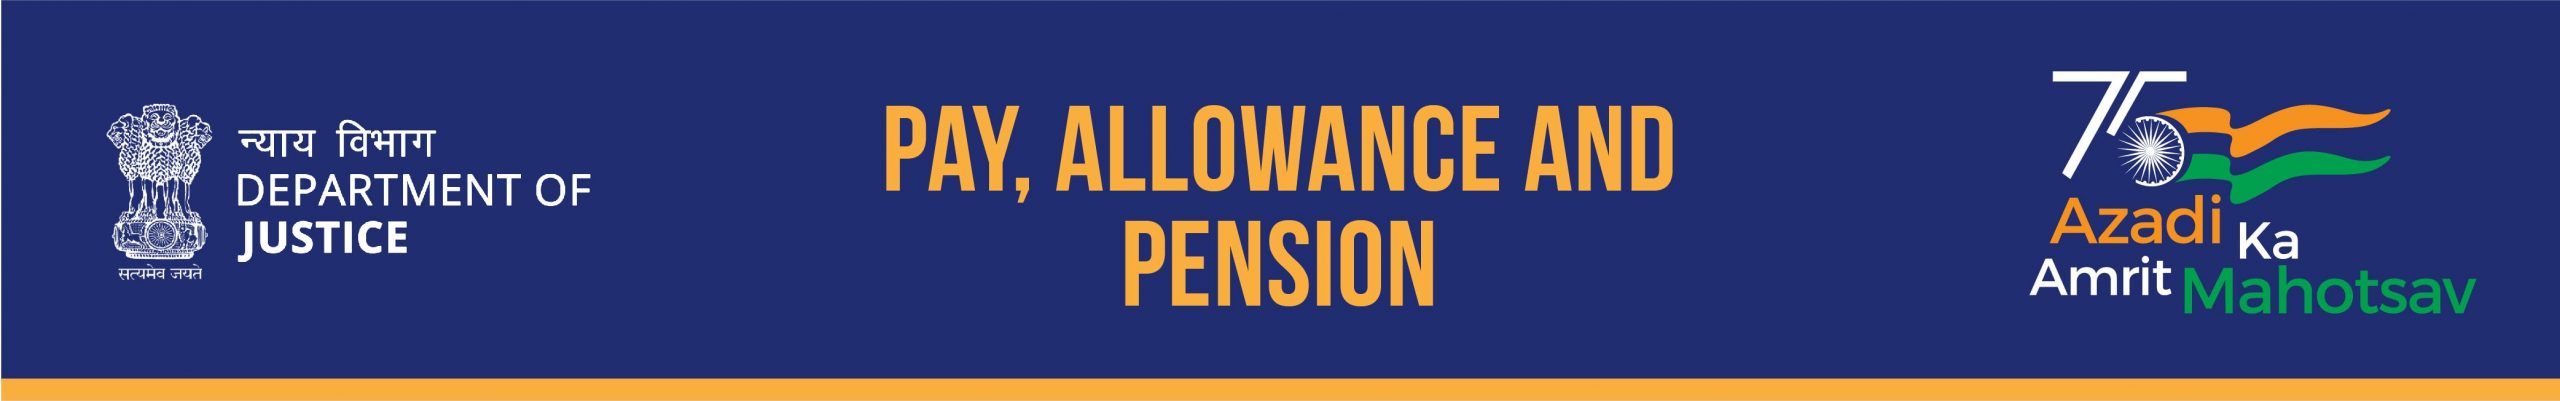 Pay. Allowance and pension